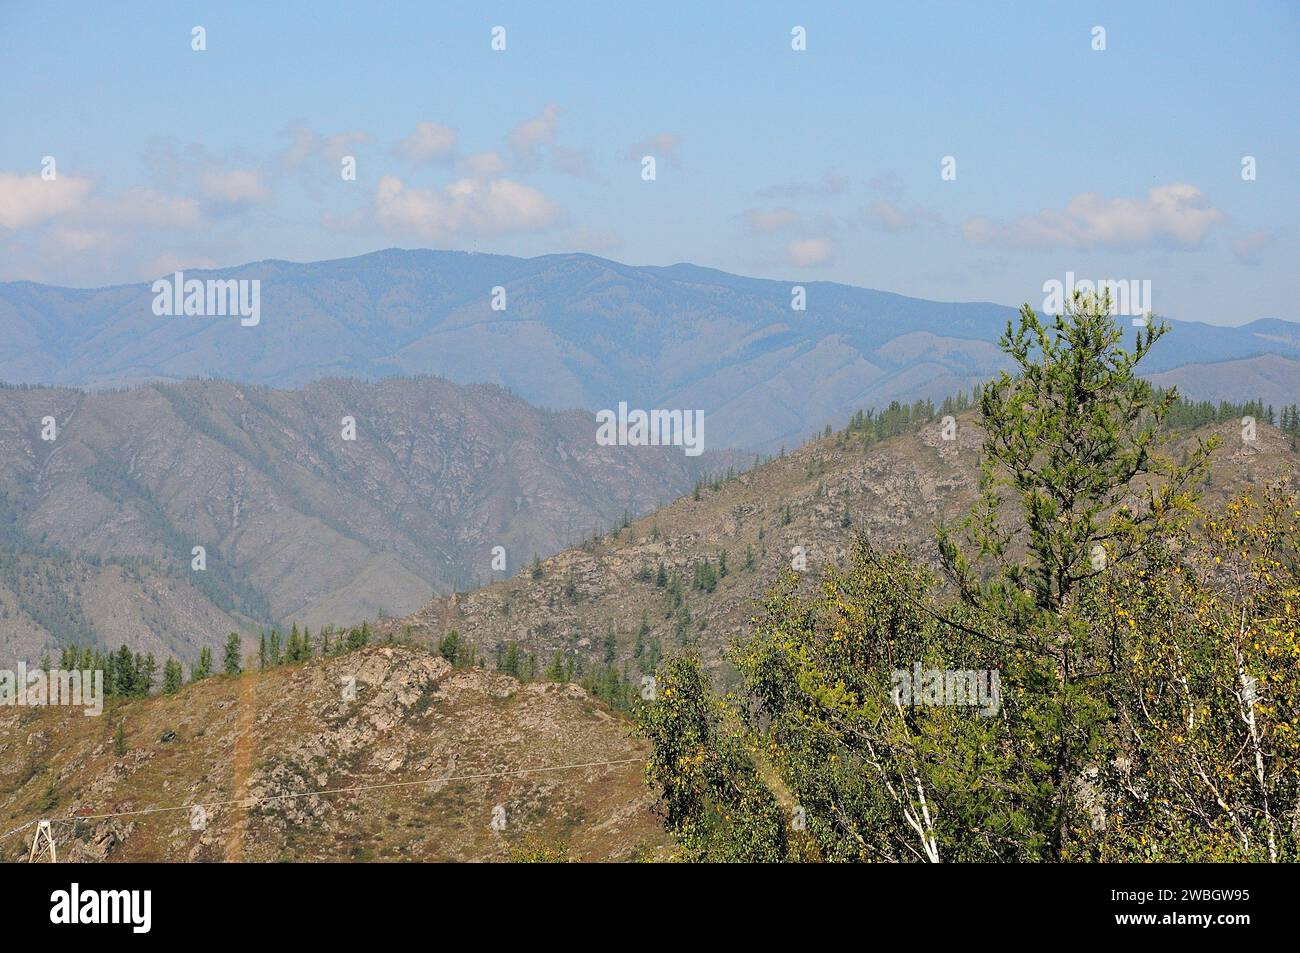 A low pine tree on top of a hill against the backdrop of a mountain top in a beautiful valley under a summer cloudy sky. Altai, Siberia, Russia. Stock Photo